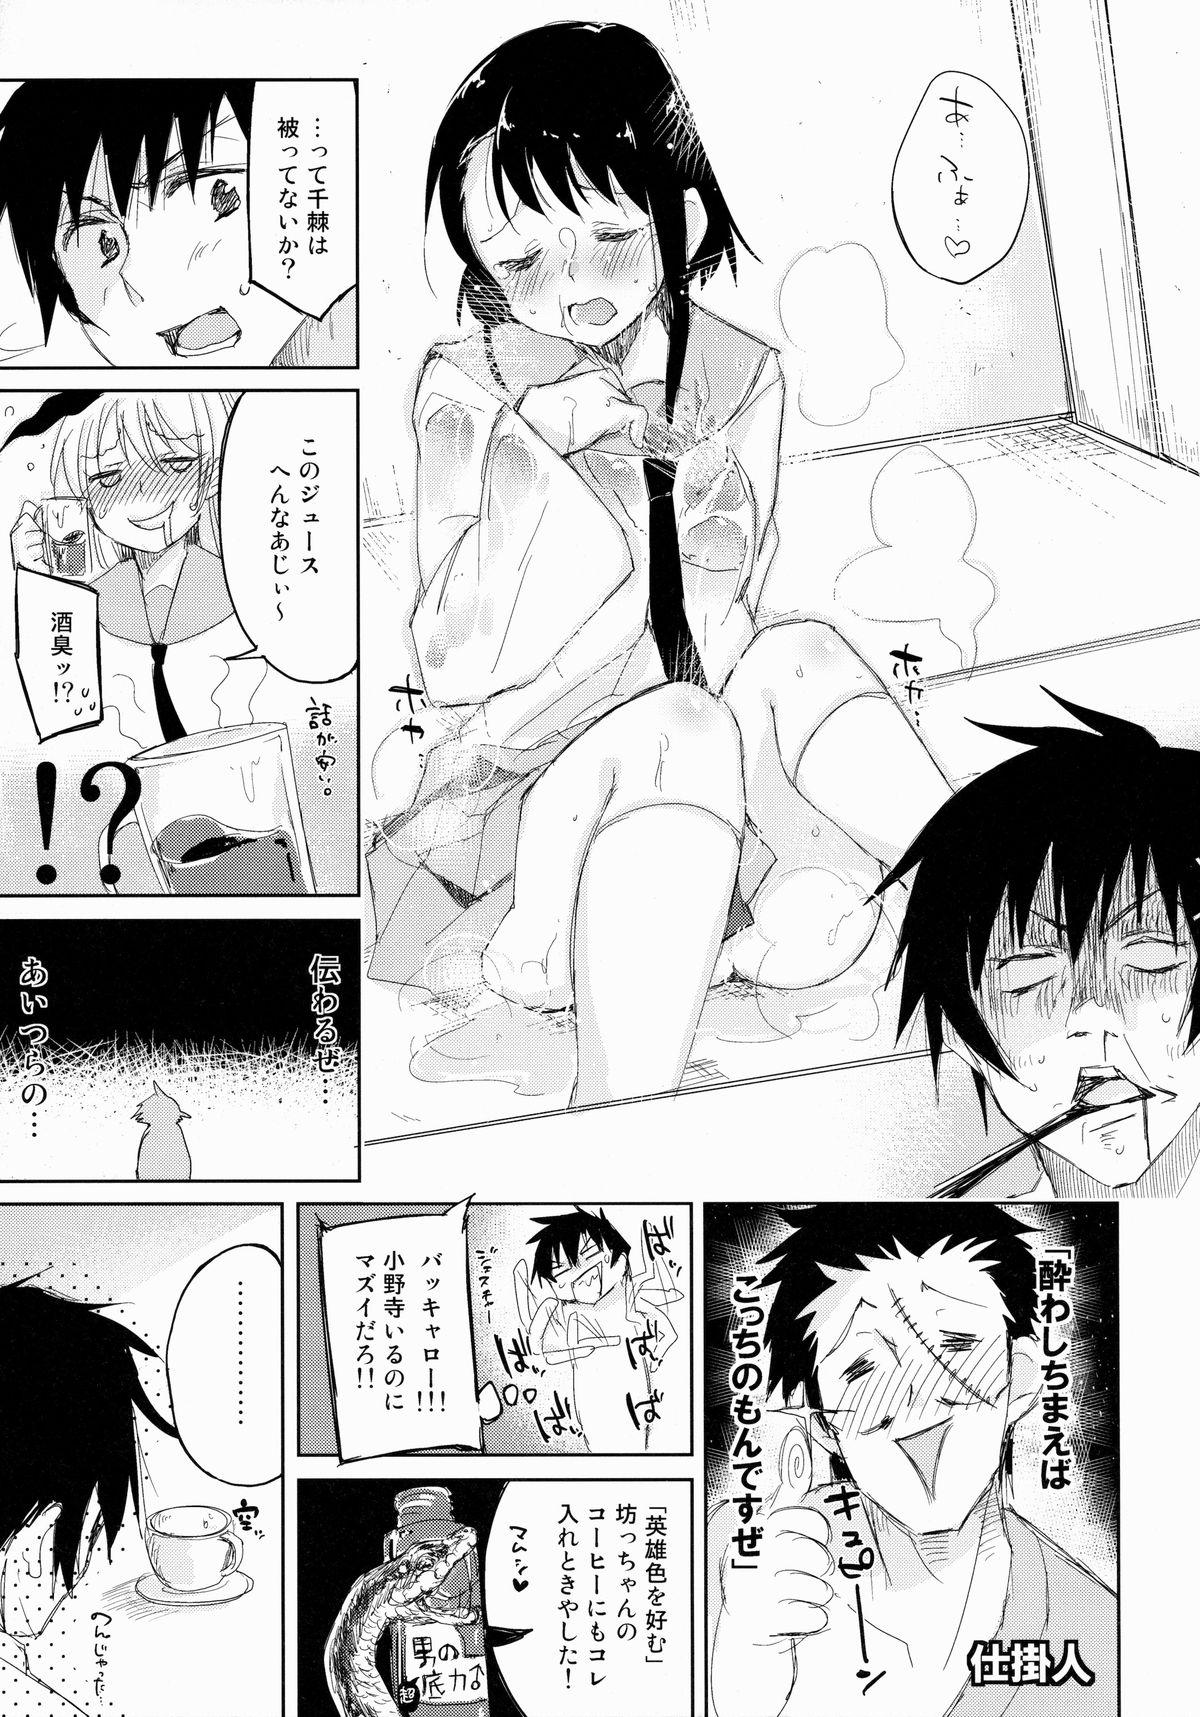 Reversecowgirl Sikkoi Vol.2 - Nisekoi Step Brother - Page 6